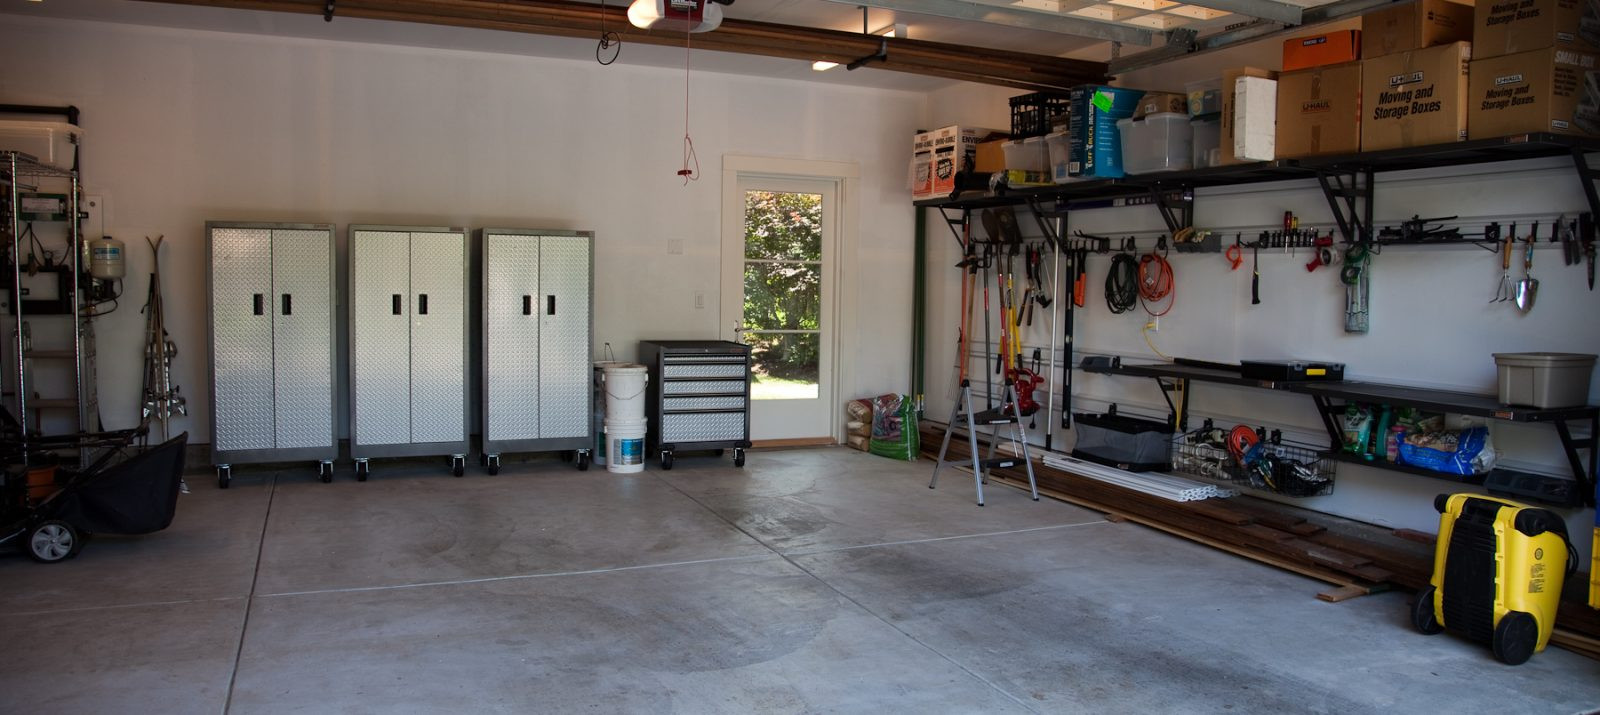 Organize My Garage
 How To Easily Clean And Organize Your Garage [Infographic]